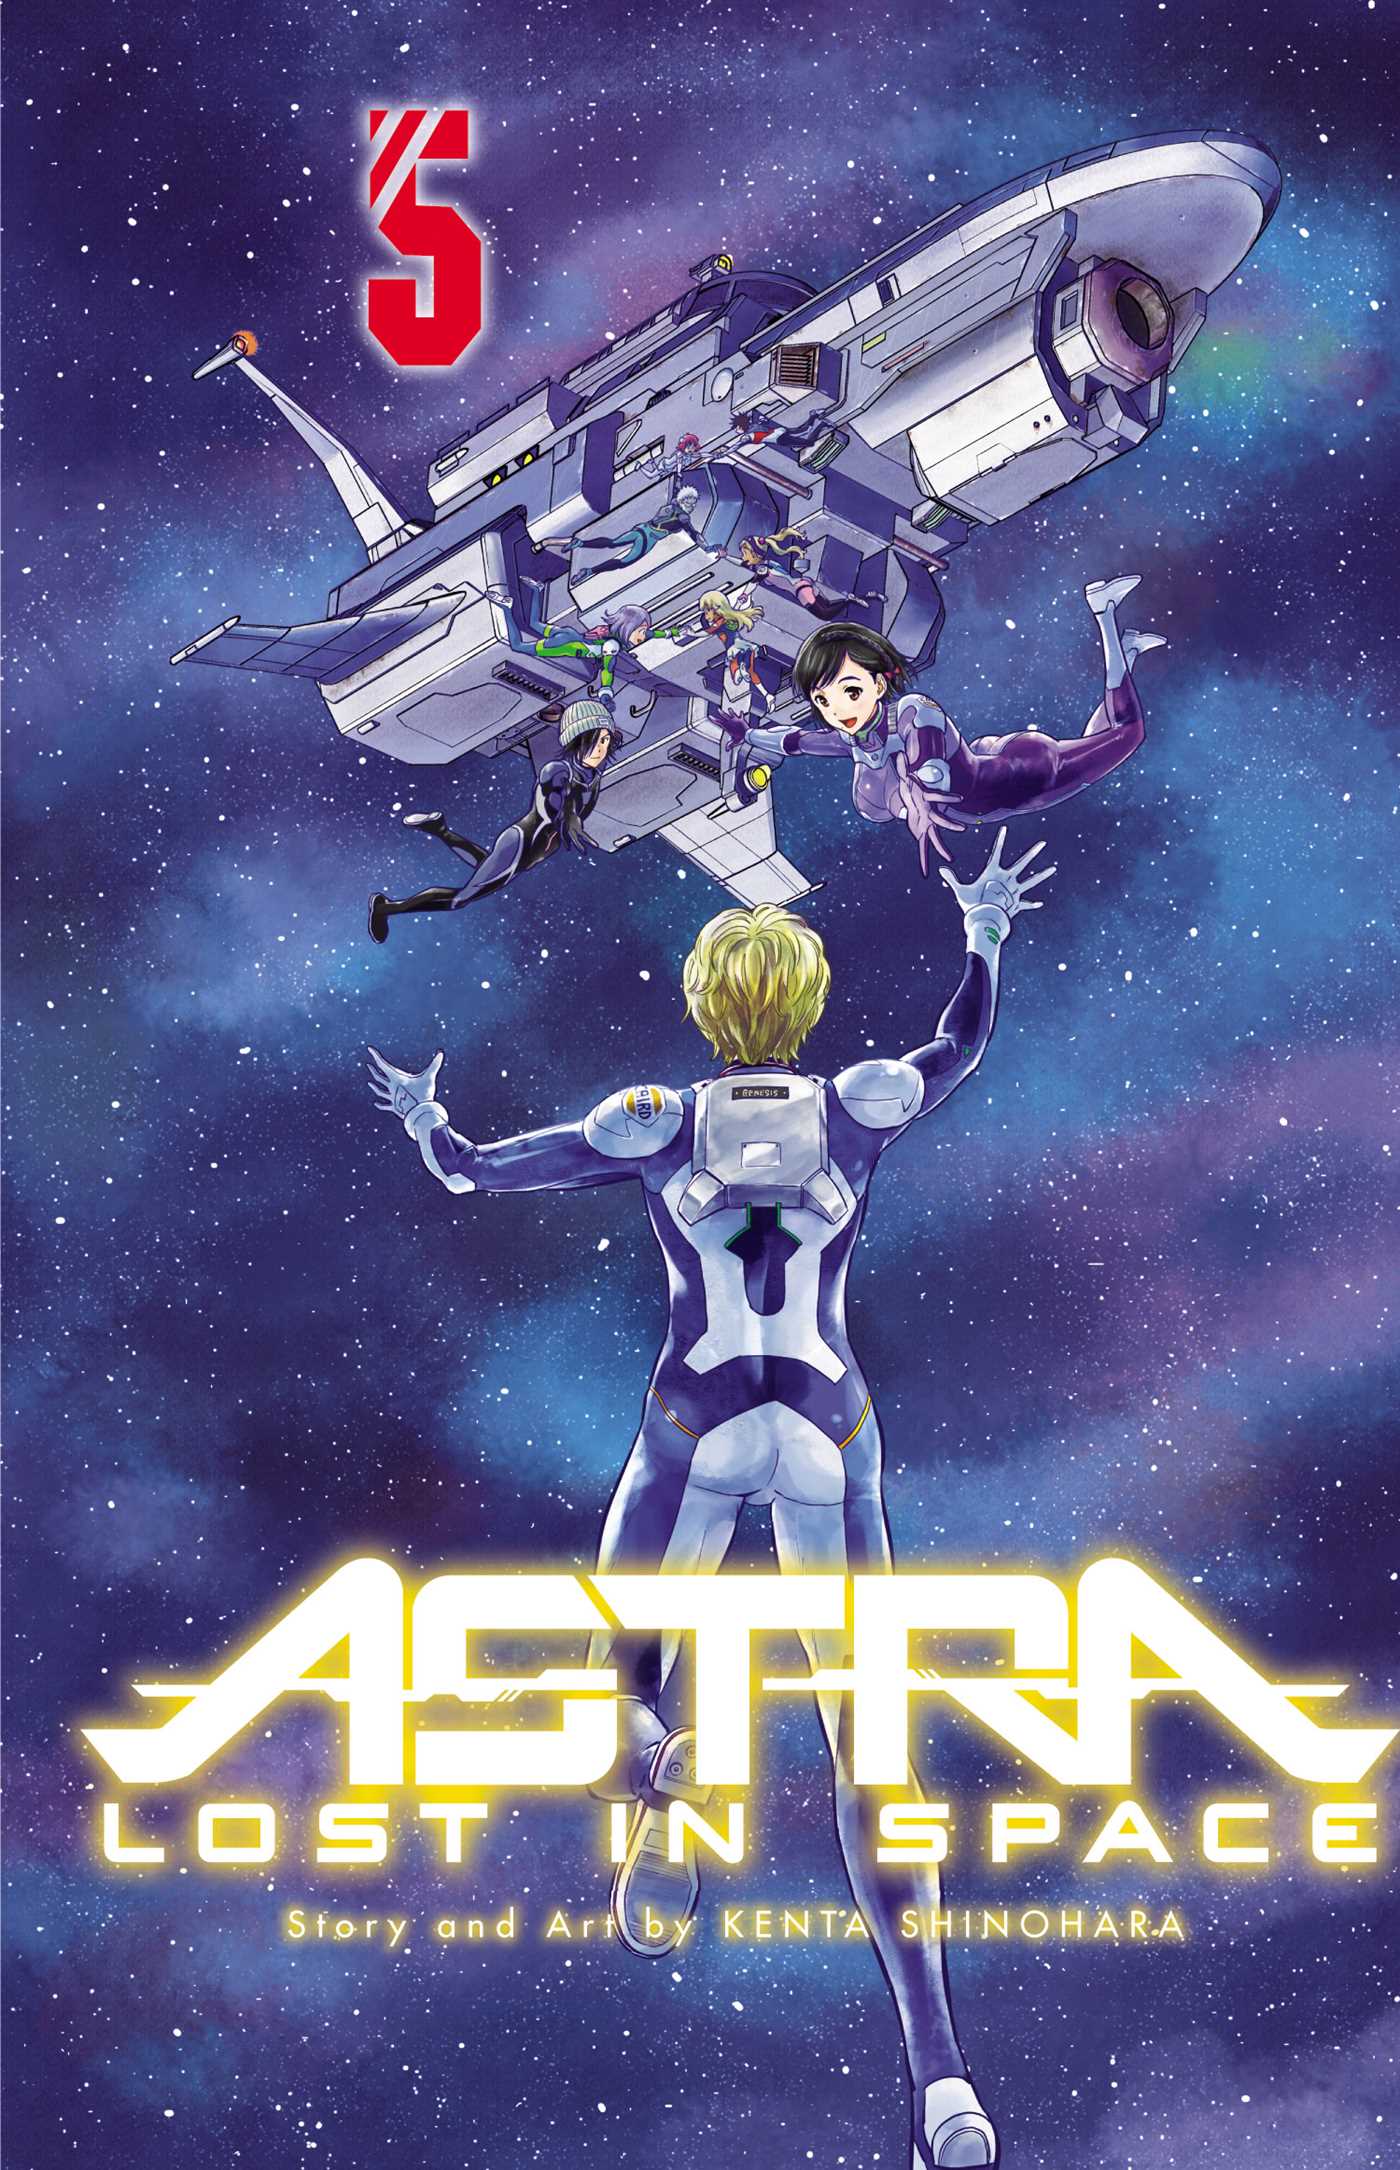 Astra Lost in Space, Vol. 5 - Manga Warehouse